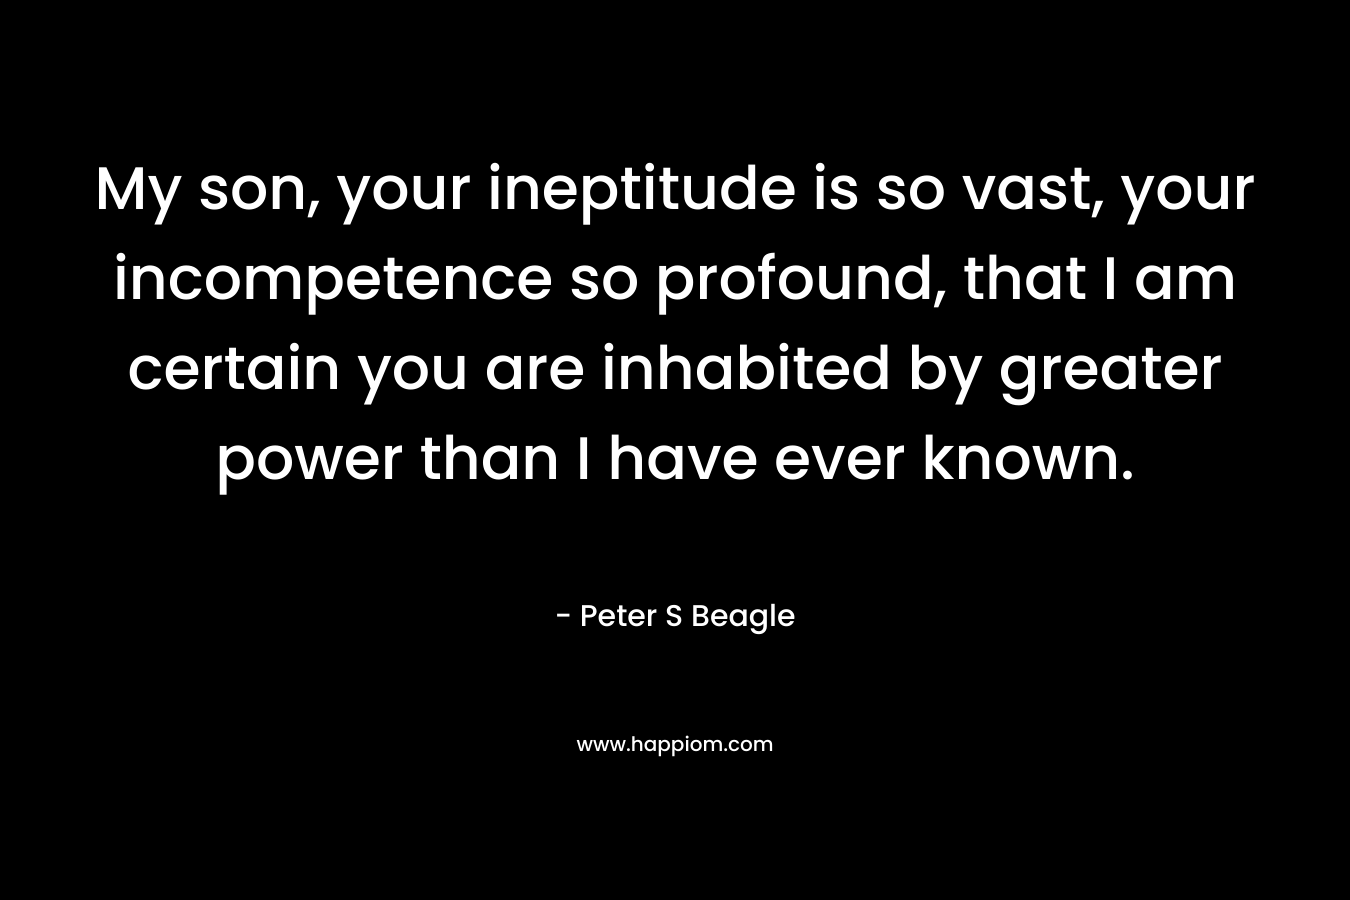 My son, your ineptitude is so vast, your incompetence so profound, that I am certain you are inhabited by greater power than I have ever known. – Peter S Beagle